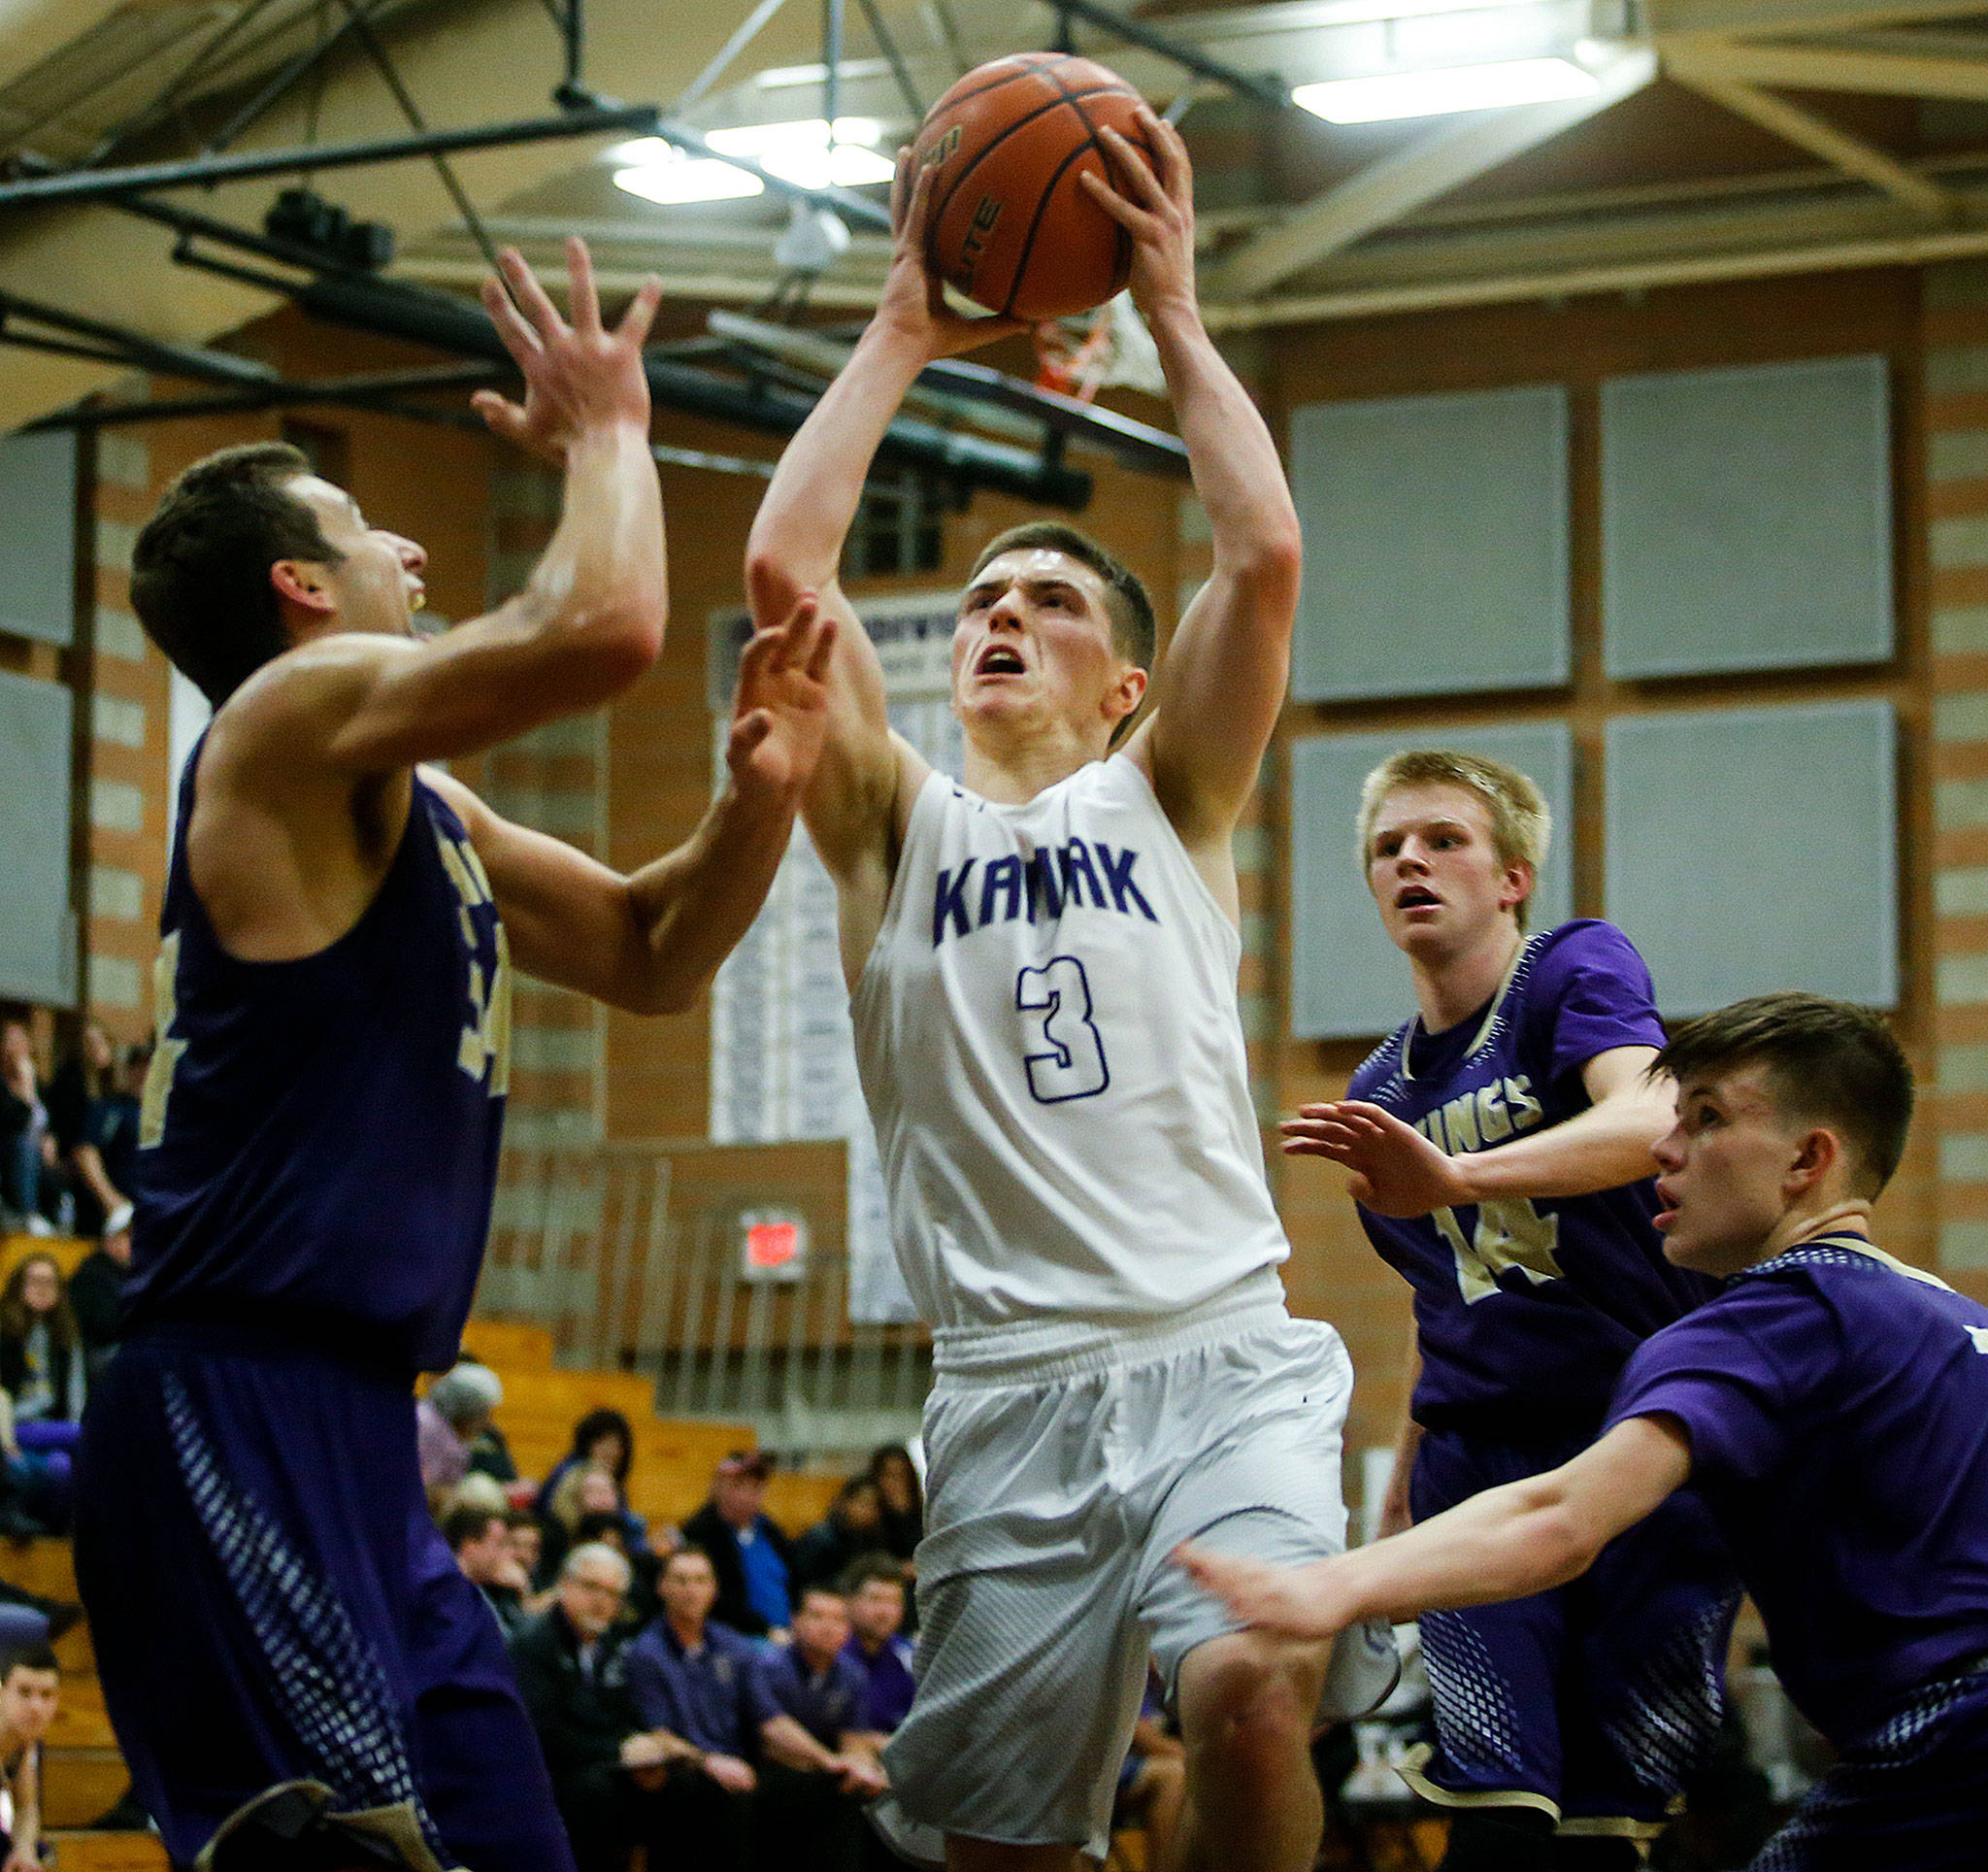 Kamiak’s Carson Tuttle (3) weaves past Lake Stevens defenders during a game in January in Mukilteo. The junior guard was named to the Class 4A All-State first team Monday by Associated Press. (Ian Terry / The Herald)